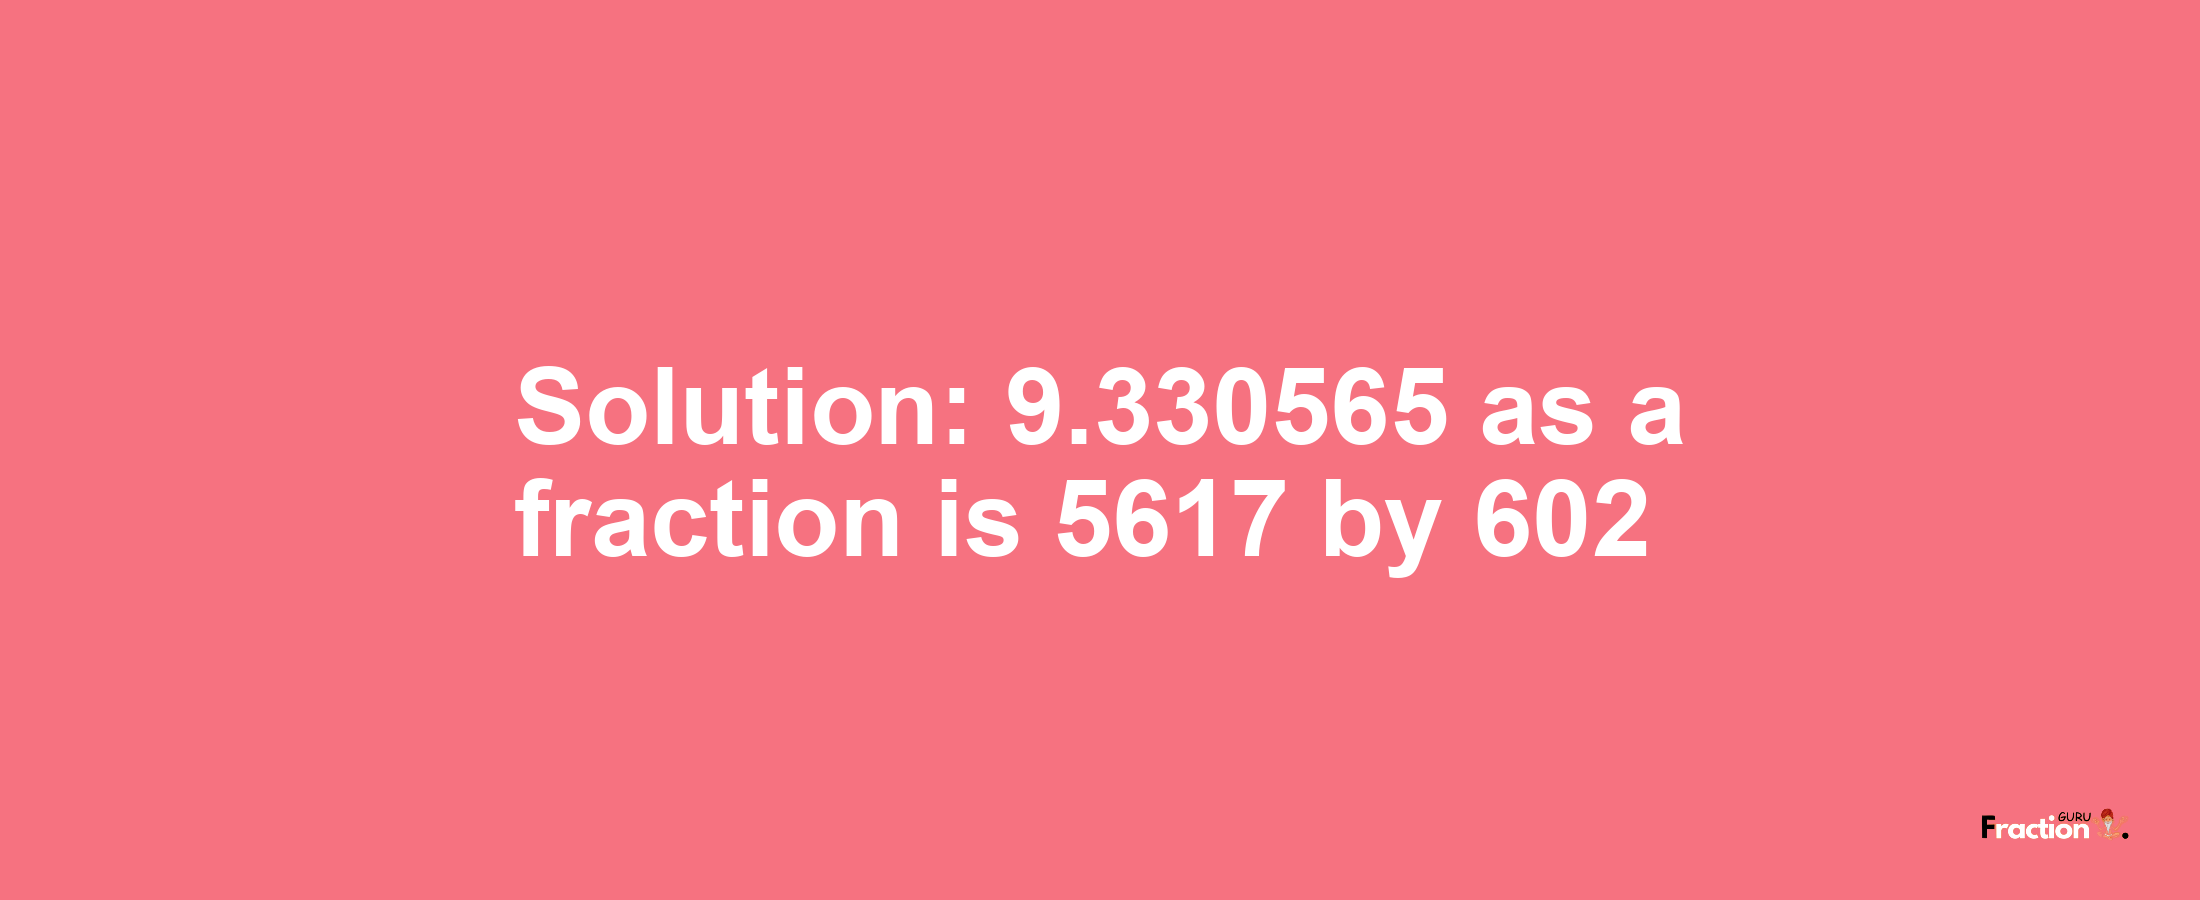 Solution:9.330565 as a fraction is 5617/602